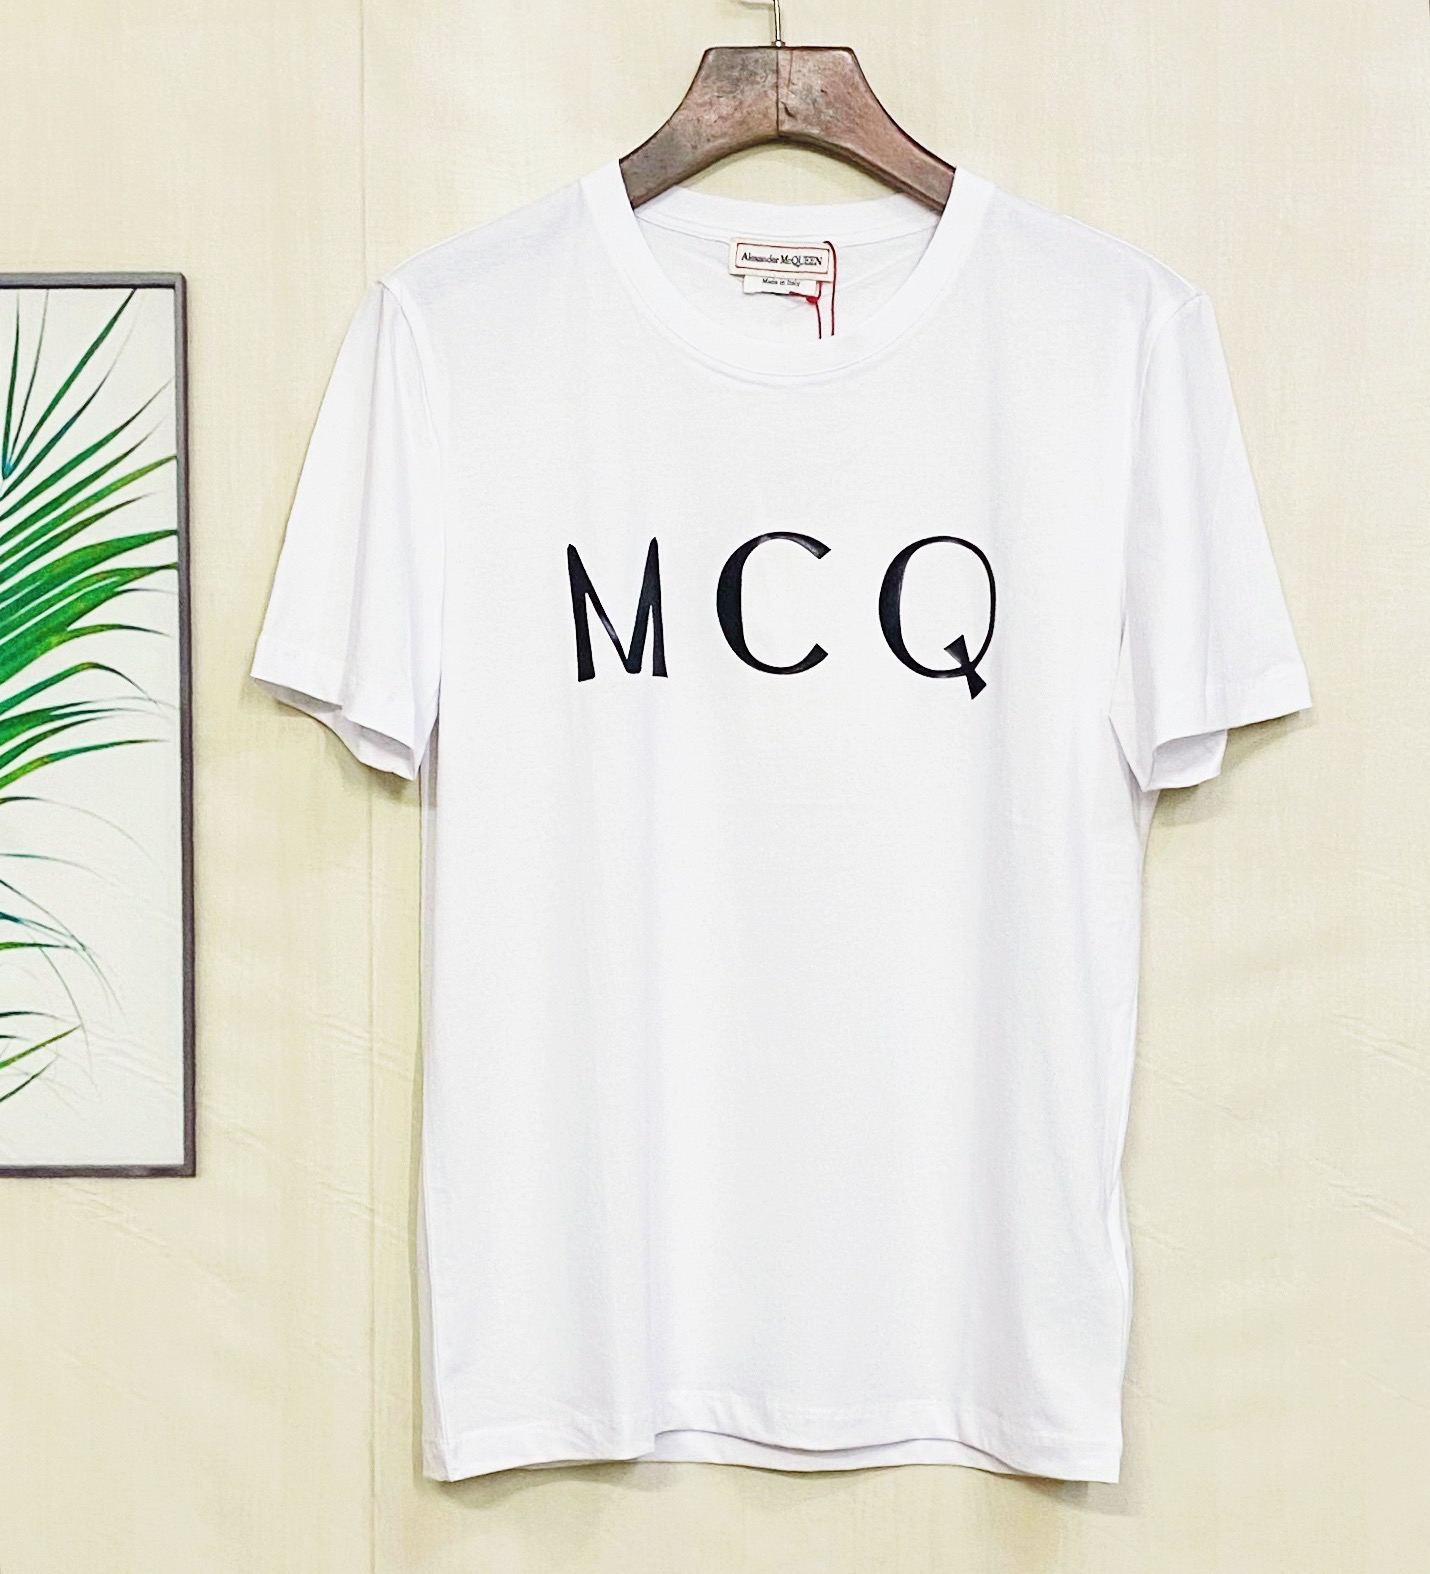 A1exander Mcque 2020 summer men's short-sleeved T-shirt, letter print round neck short sleeve, personality style